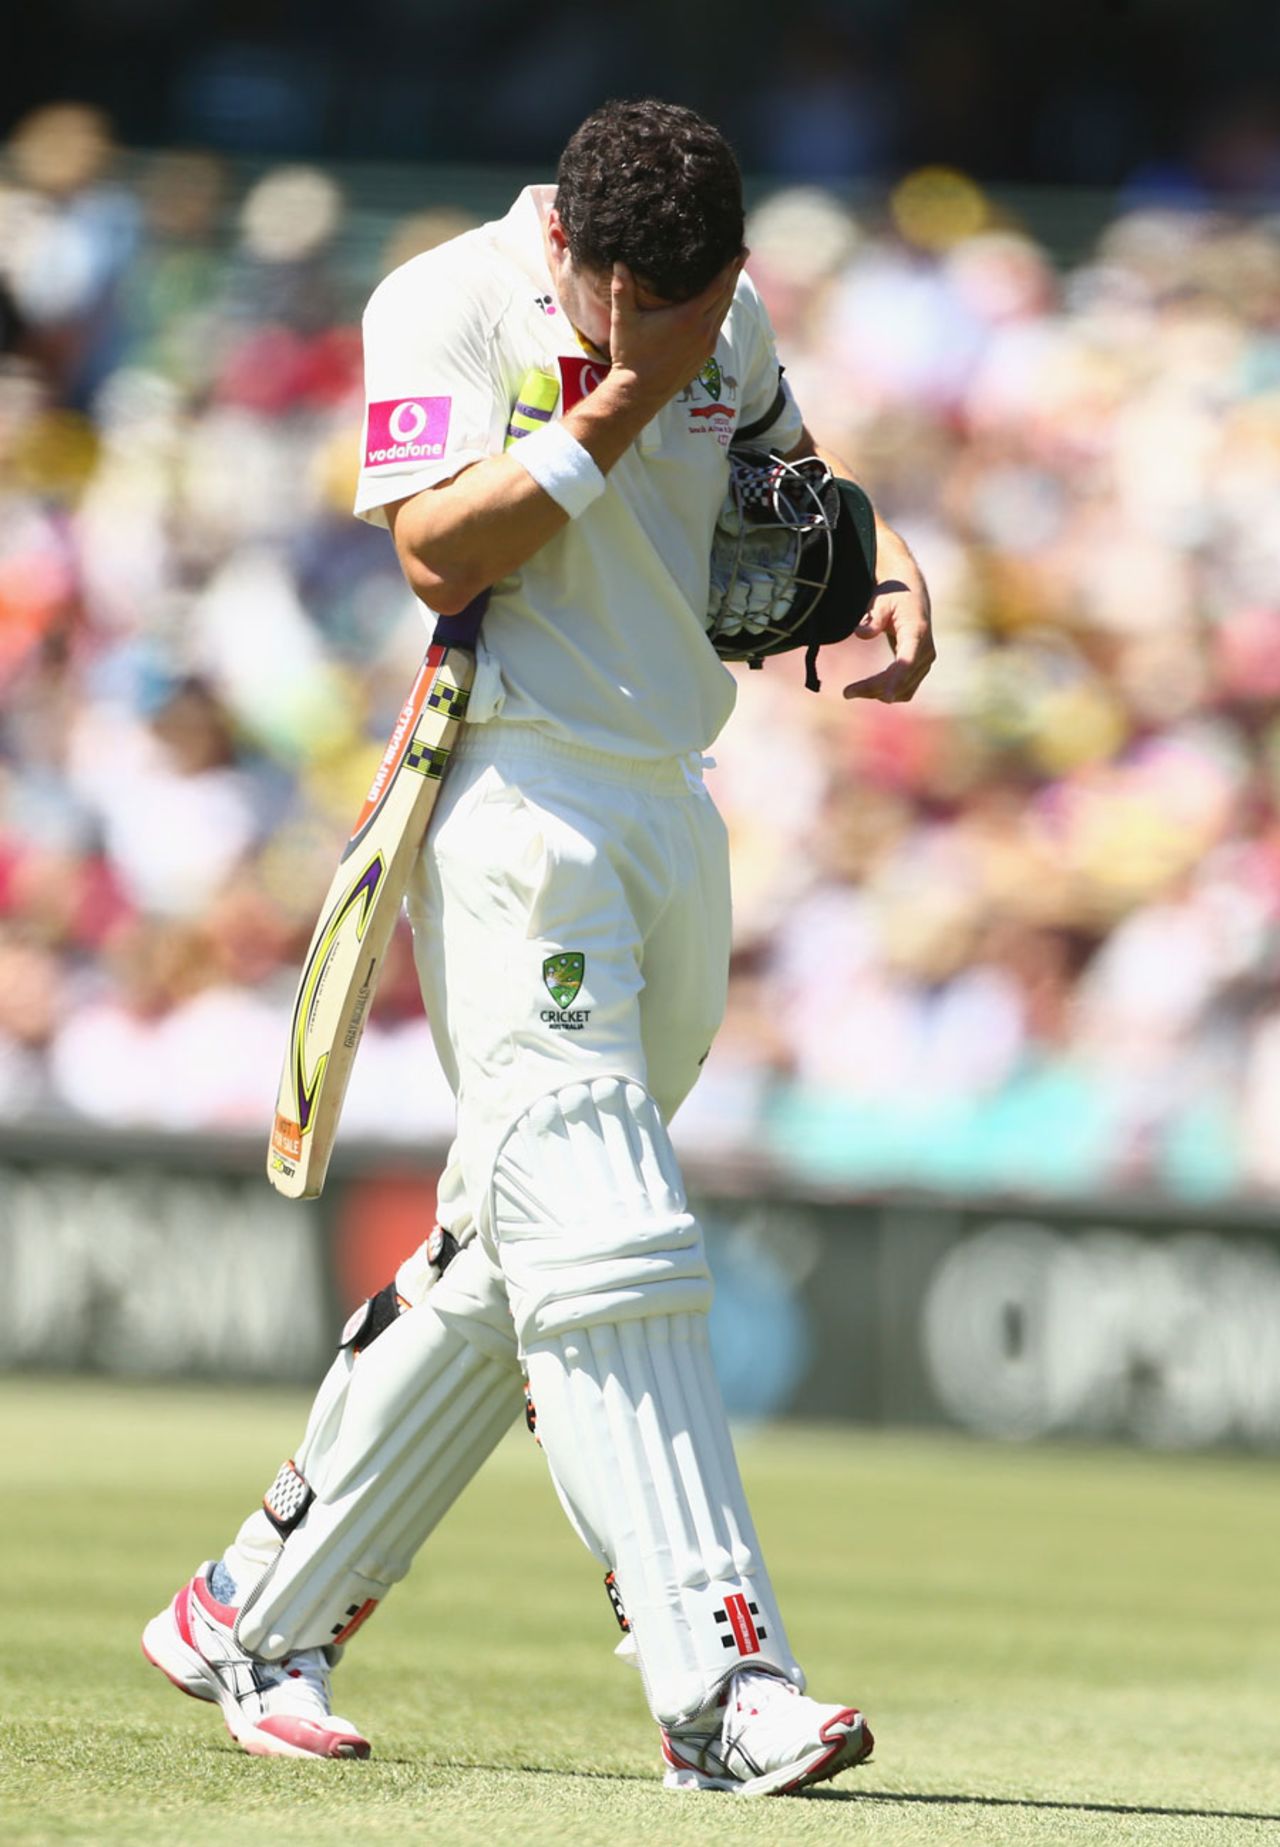 A dejected Ed Cowan after being run out for 4, Australia v Sri Lanka, 3rd Test, Sydney, 2nd day, January 4, 2013